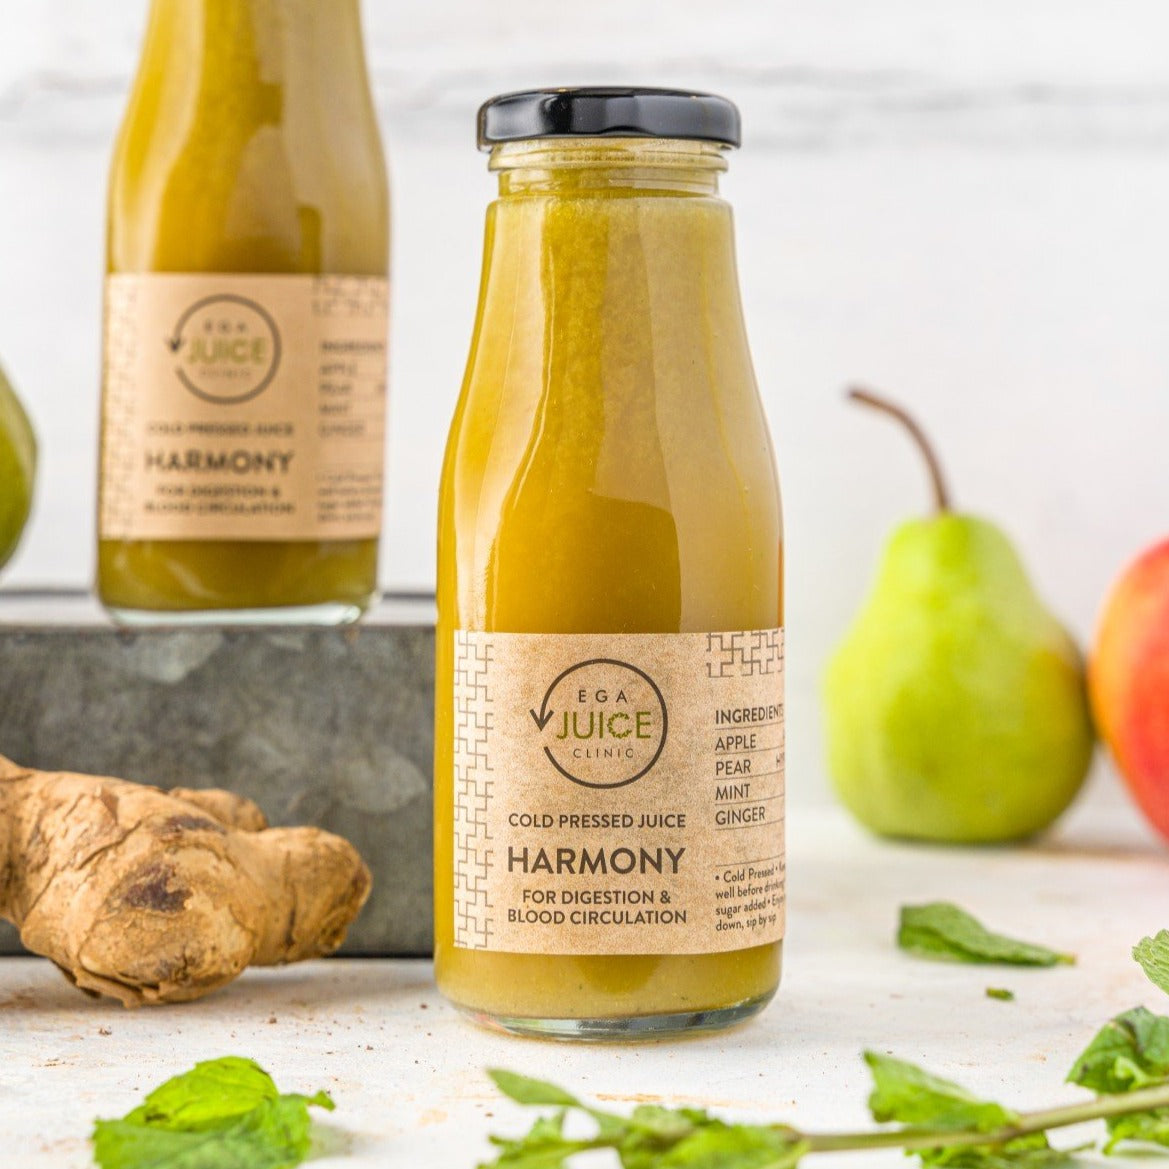 Harmony Juice - for digestion & blood circulation